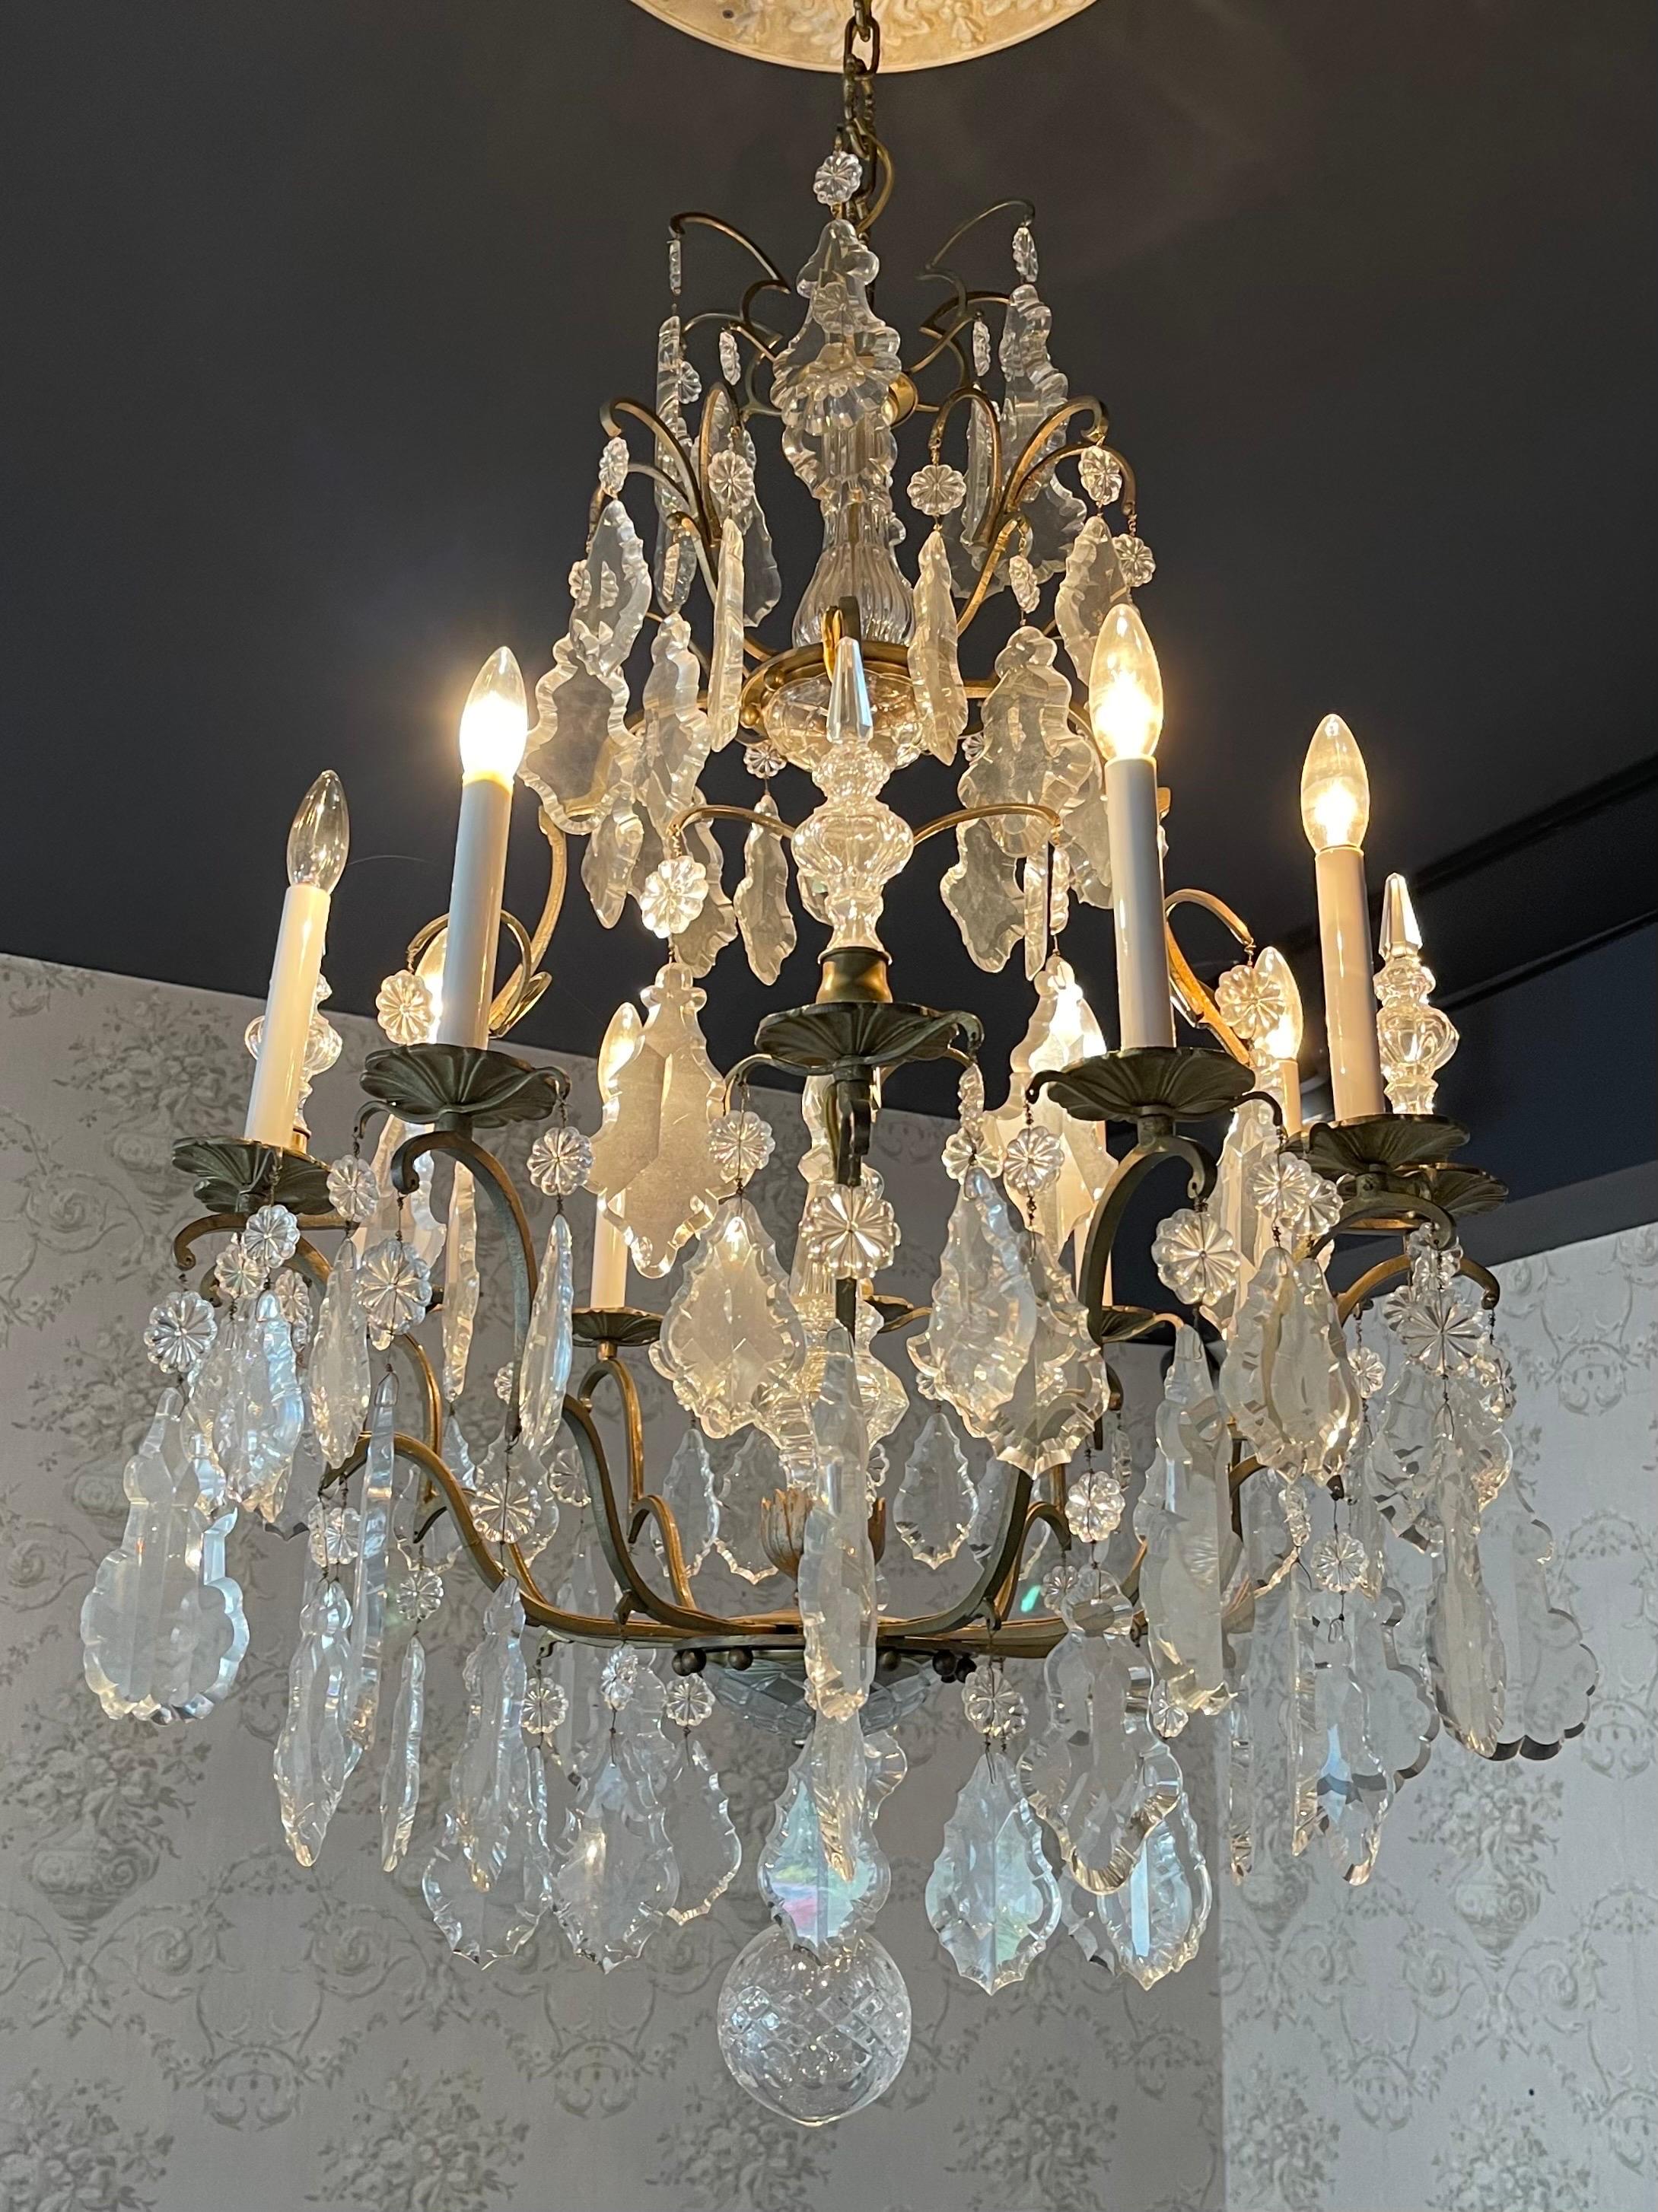 A wonderful large French bronze & crystal Louis XV bird cage with 3 spikes alternating the 6 candelabra lights and a large centerpiece spike in the middle of the chandelier.